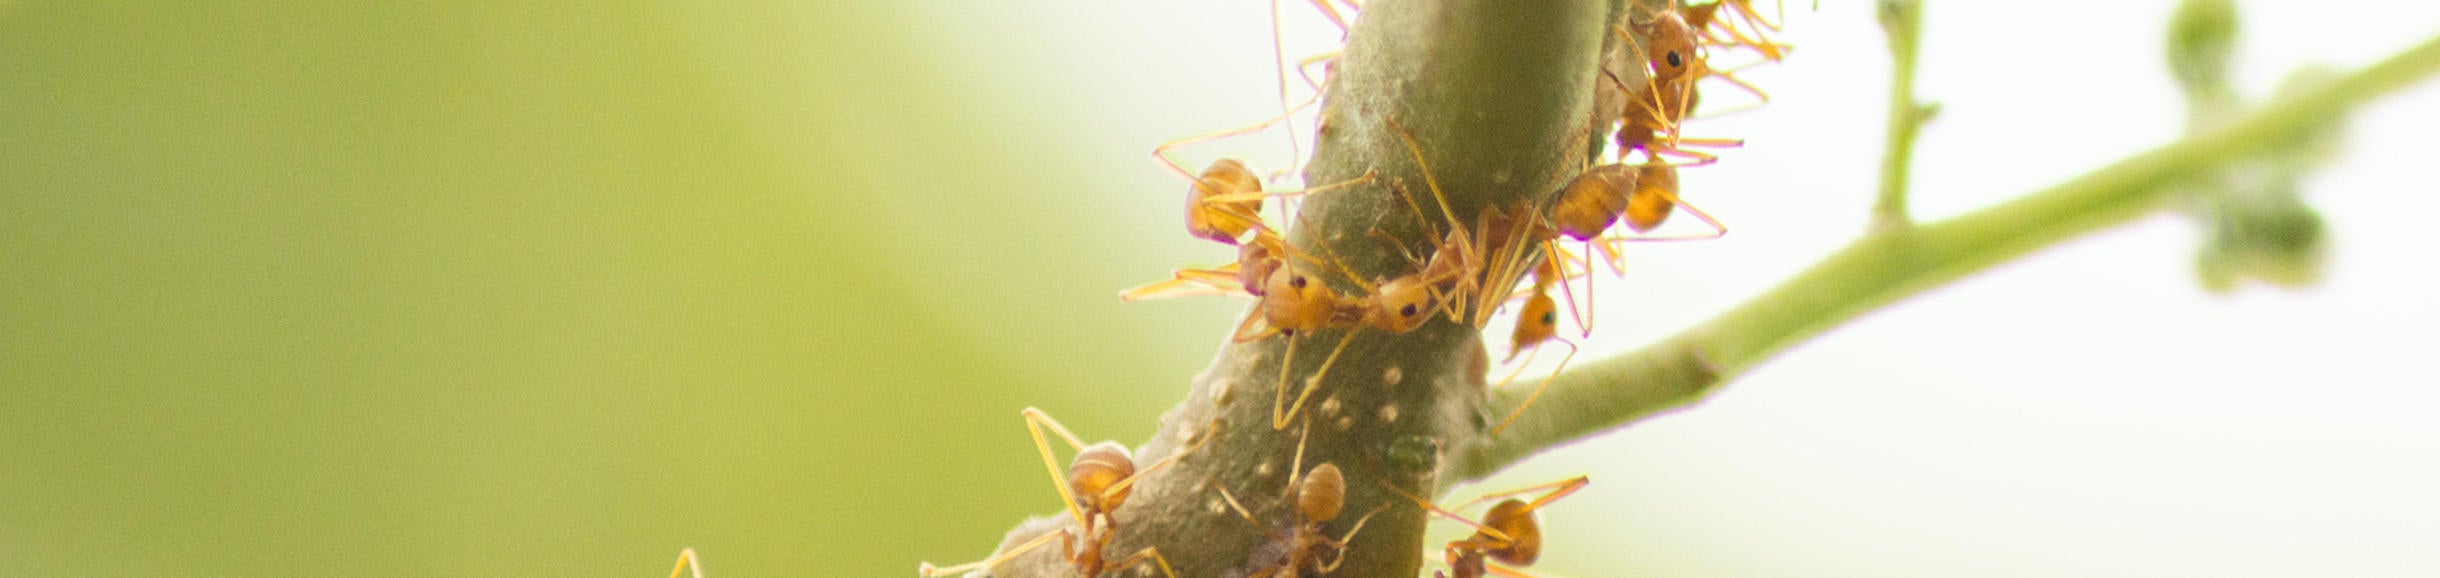 ants and aphids (c) Topcools Tee unsplash